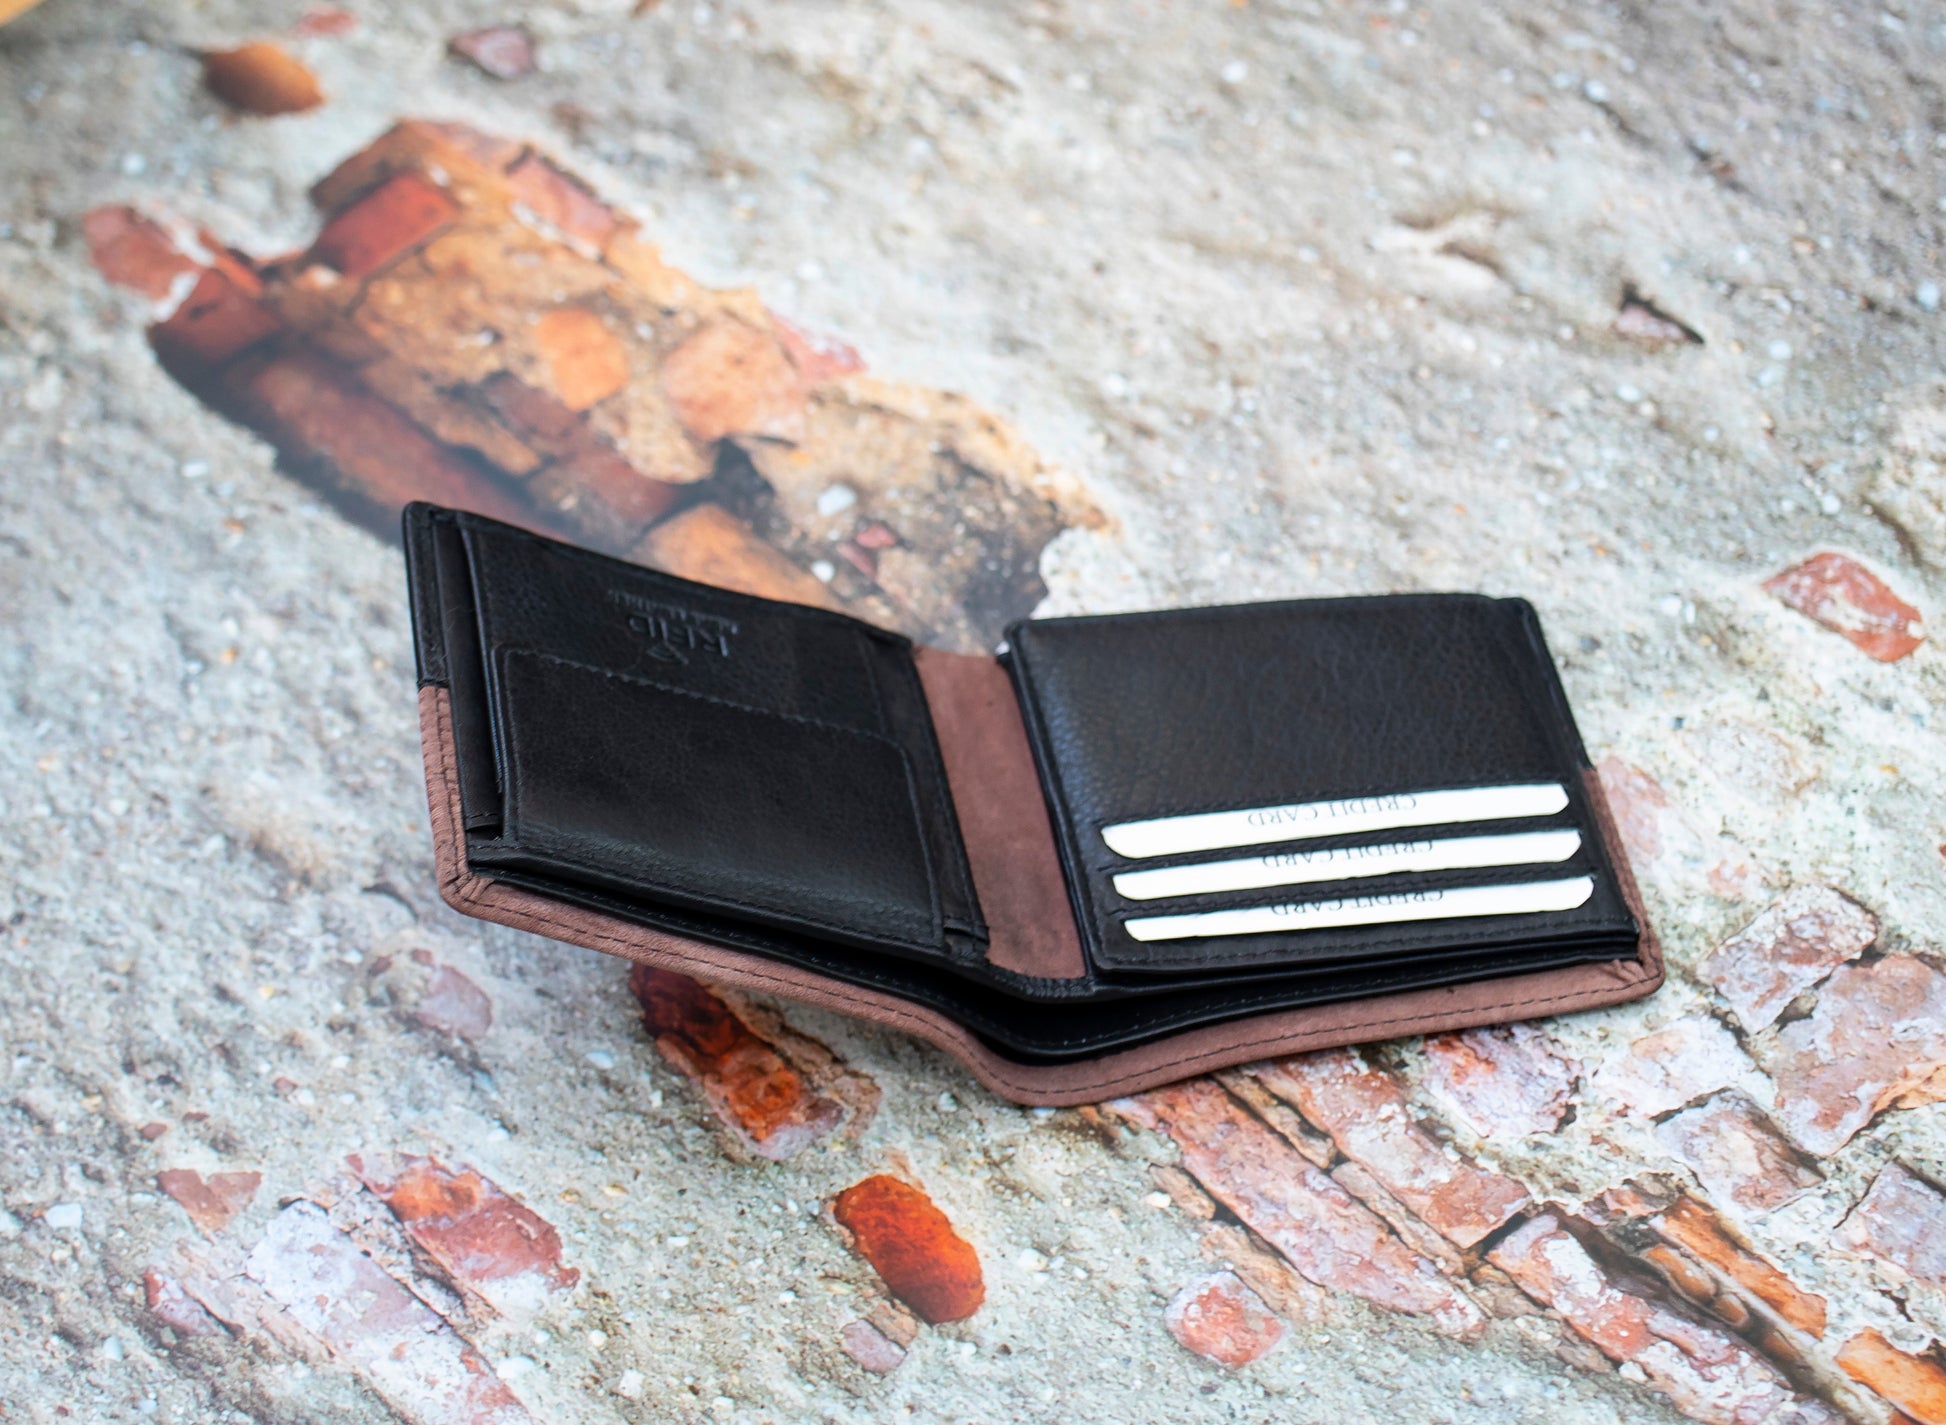 This  Trifold Leather Wallet is designed to maximize protection and organization. Featuring a trifold design with RFID blocking technology, this black and Brown leather wallet has 6 card slots, an ID window, a coin pocket, slip pockets, and 2 note compartments. Keep your personal information secure and organized with this stylish and functional wallet.  12 x 10 cm